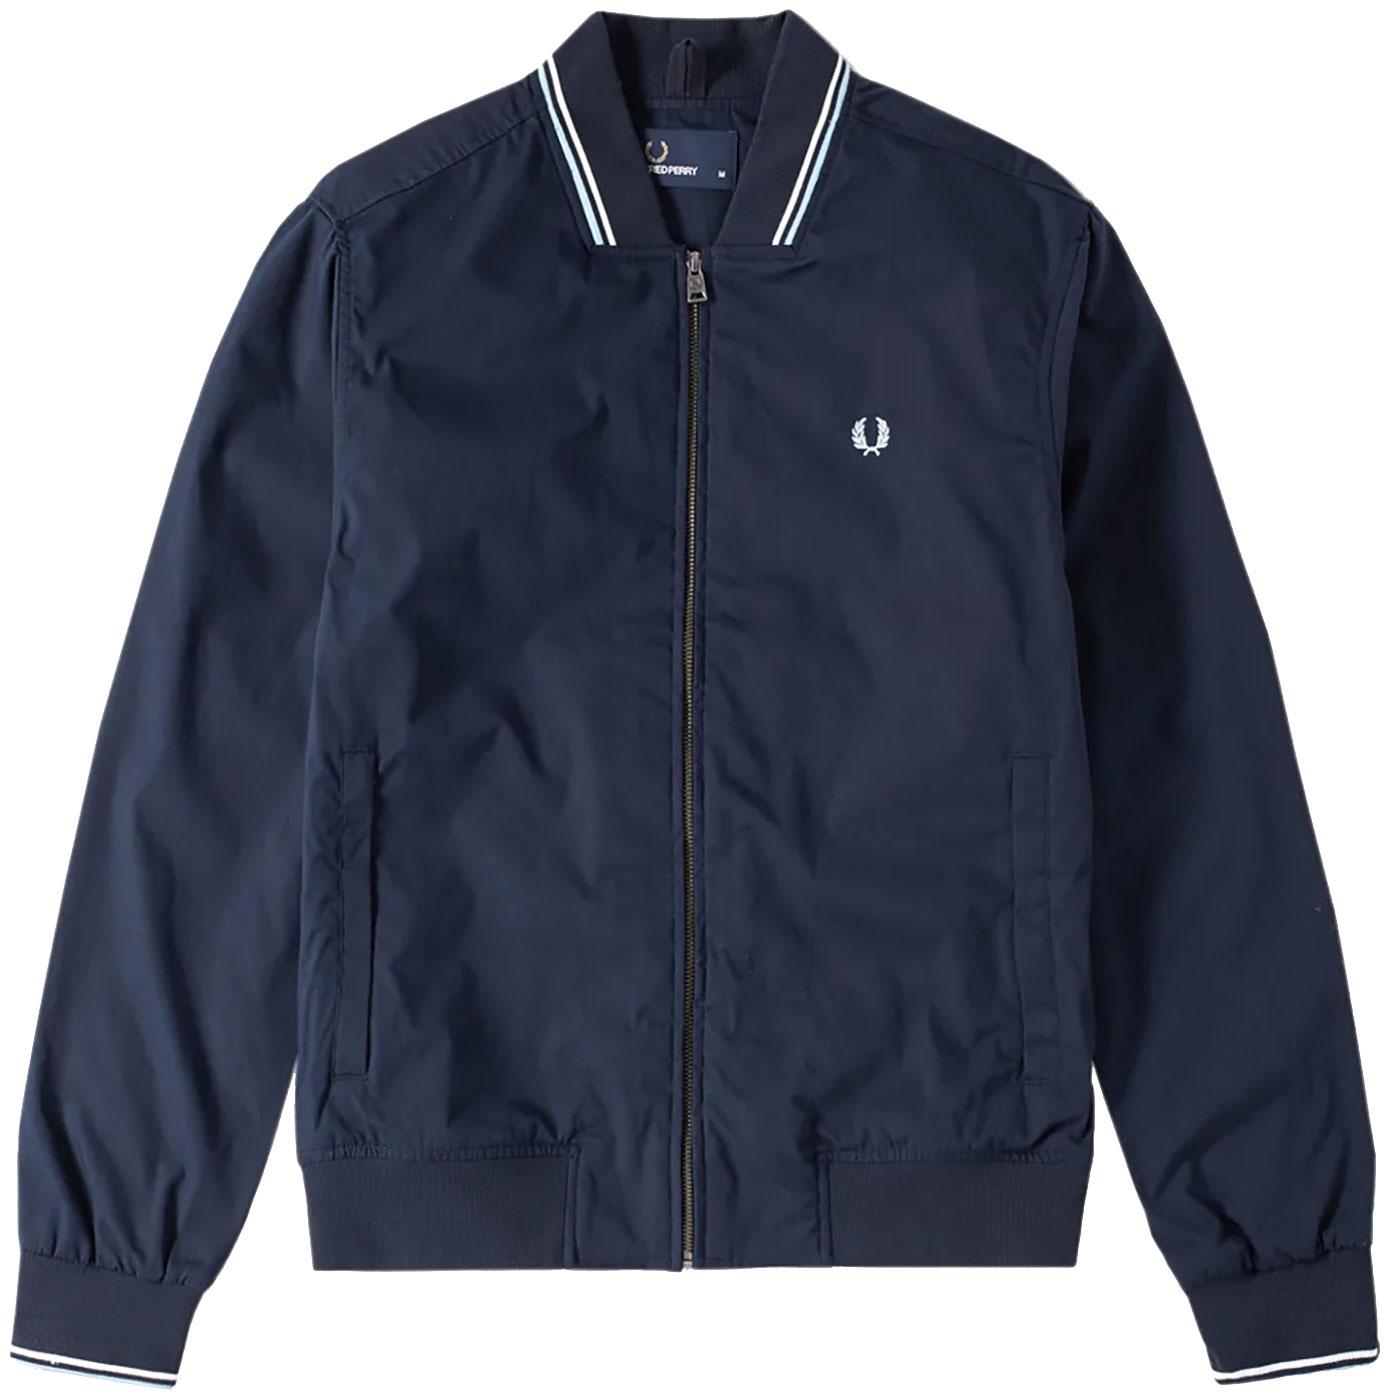 FRED PERRY Men's Twin Tipped Mod Bomber Jacket in Navy